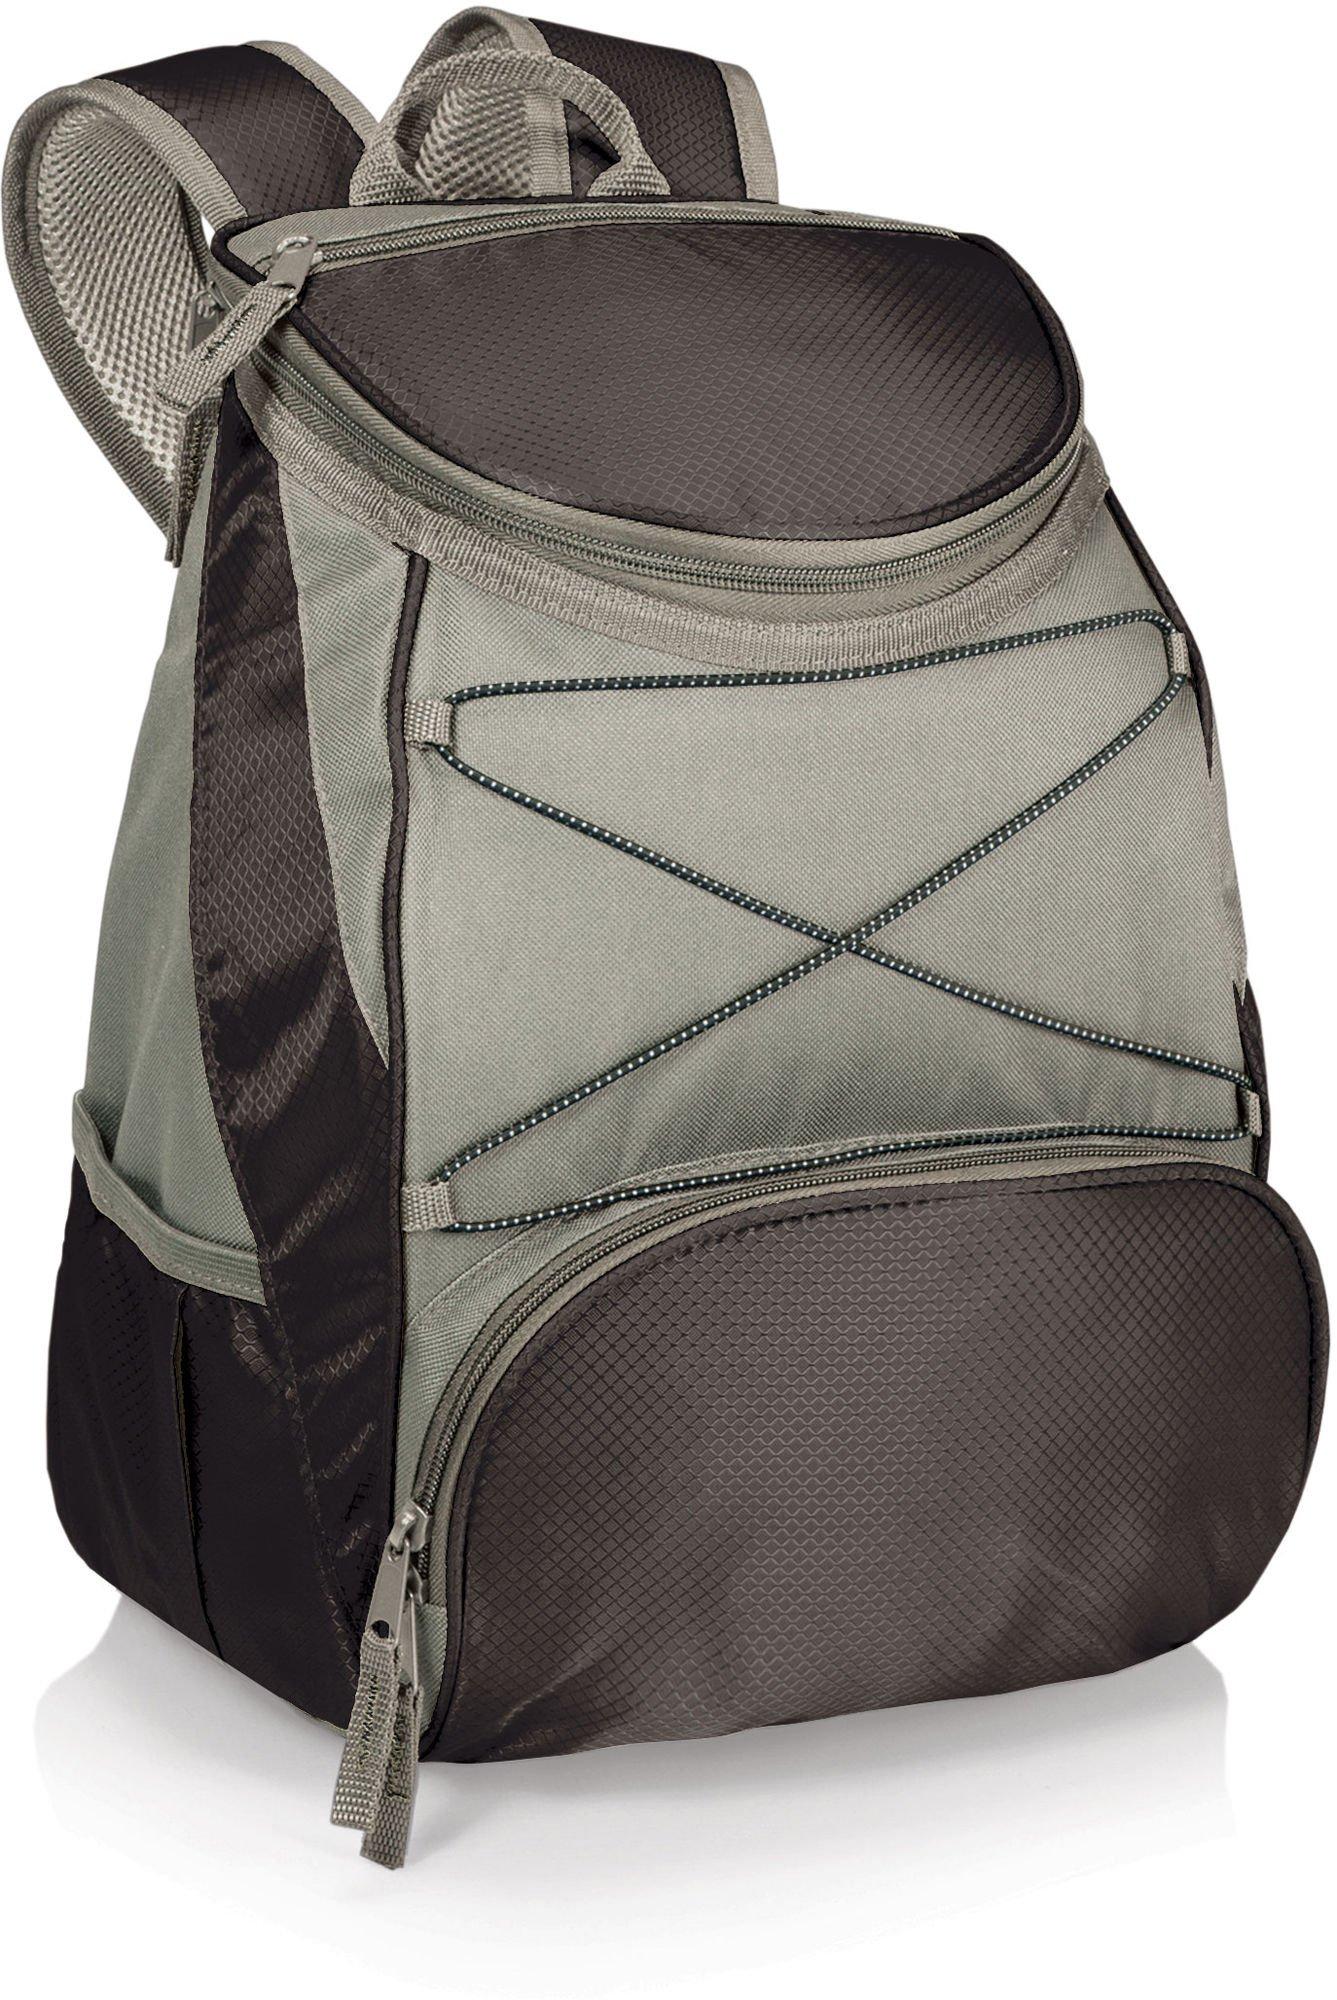 PTX Black Insulated Backpack